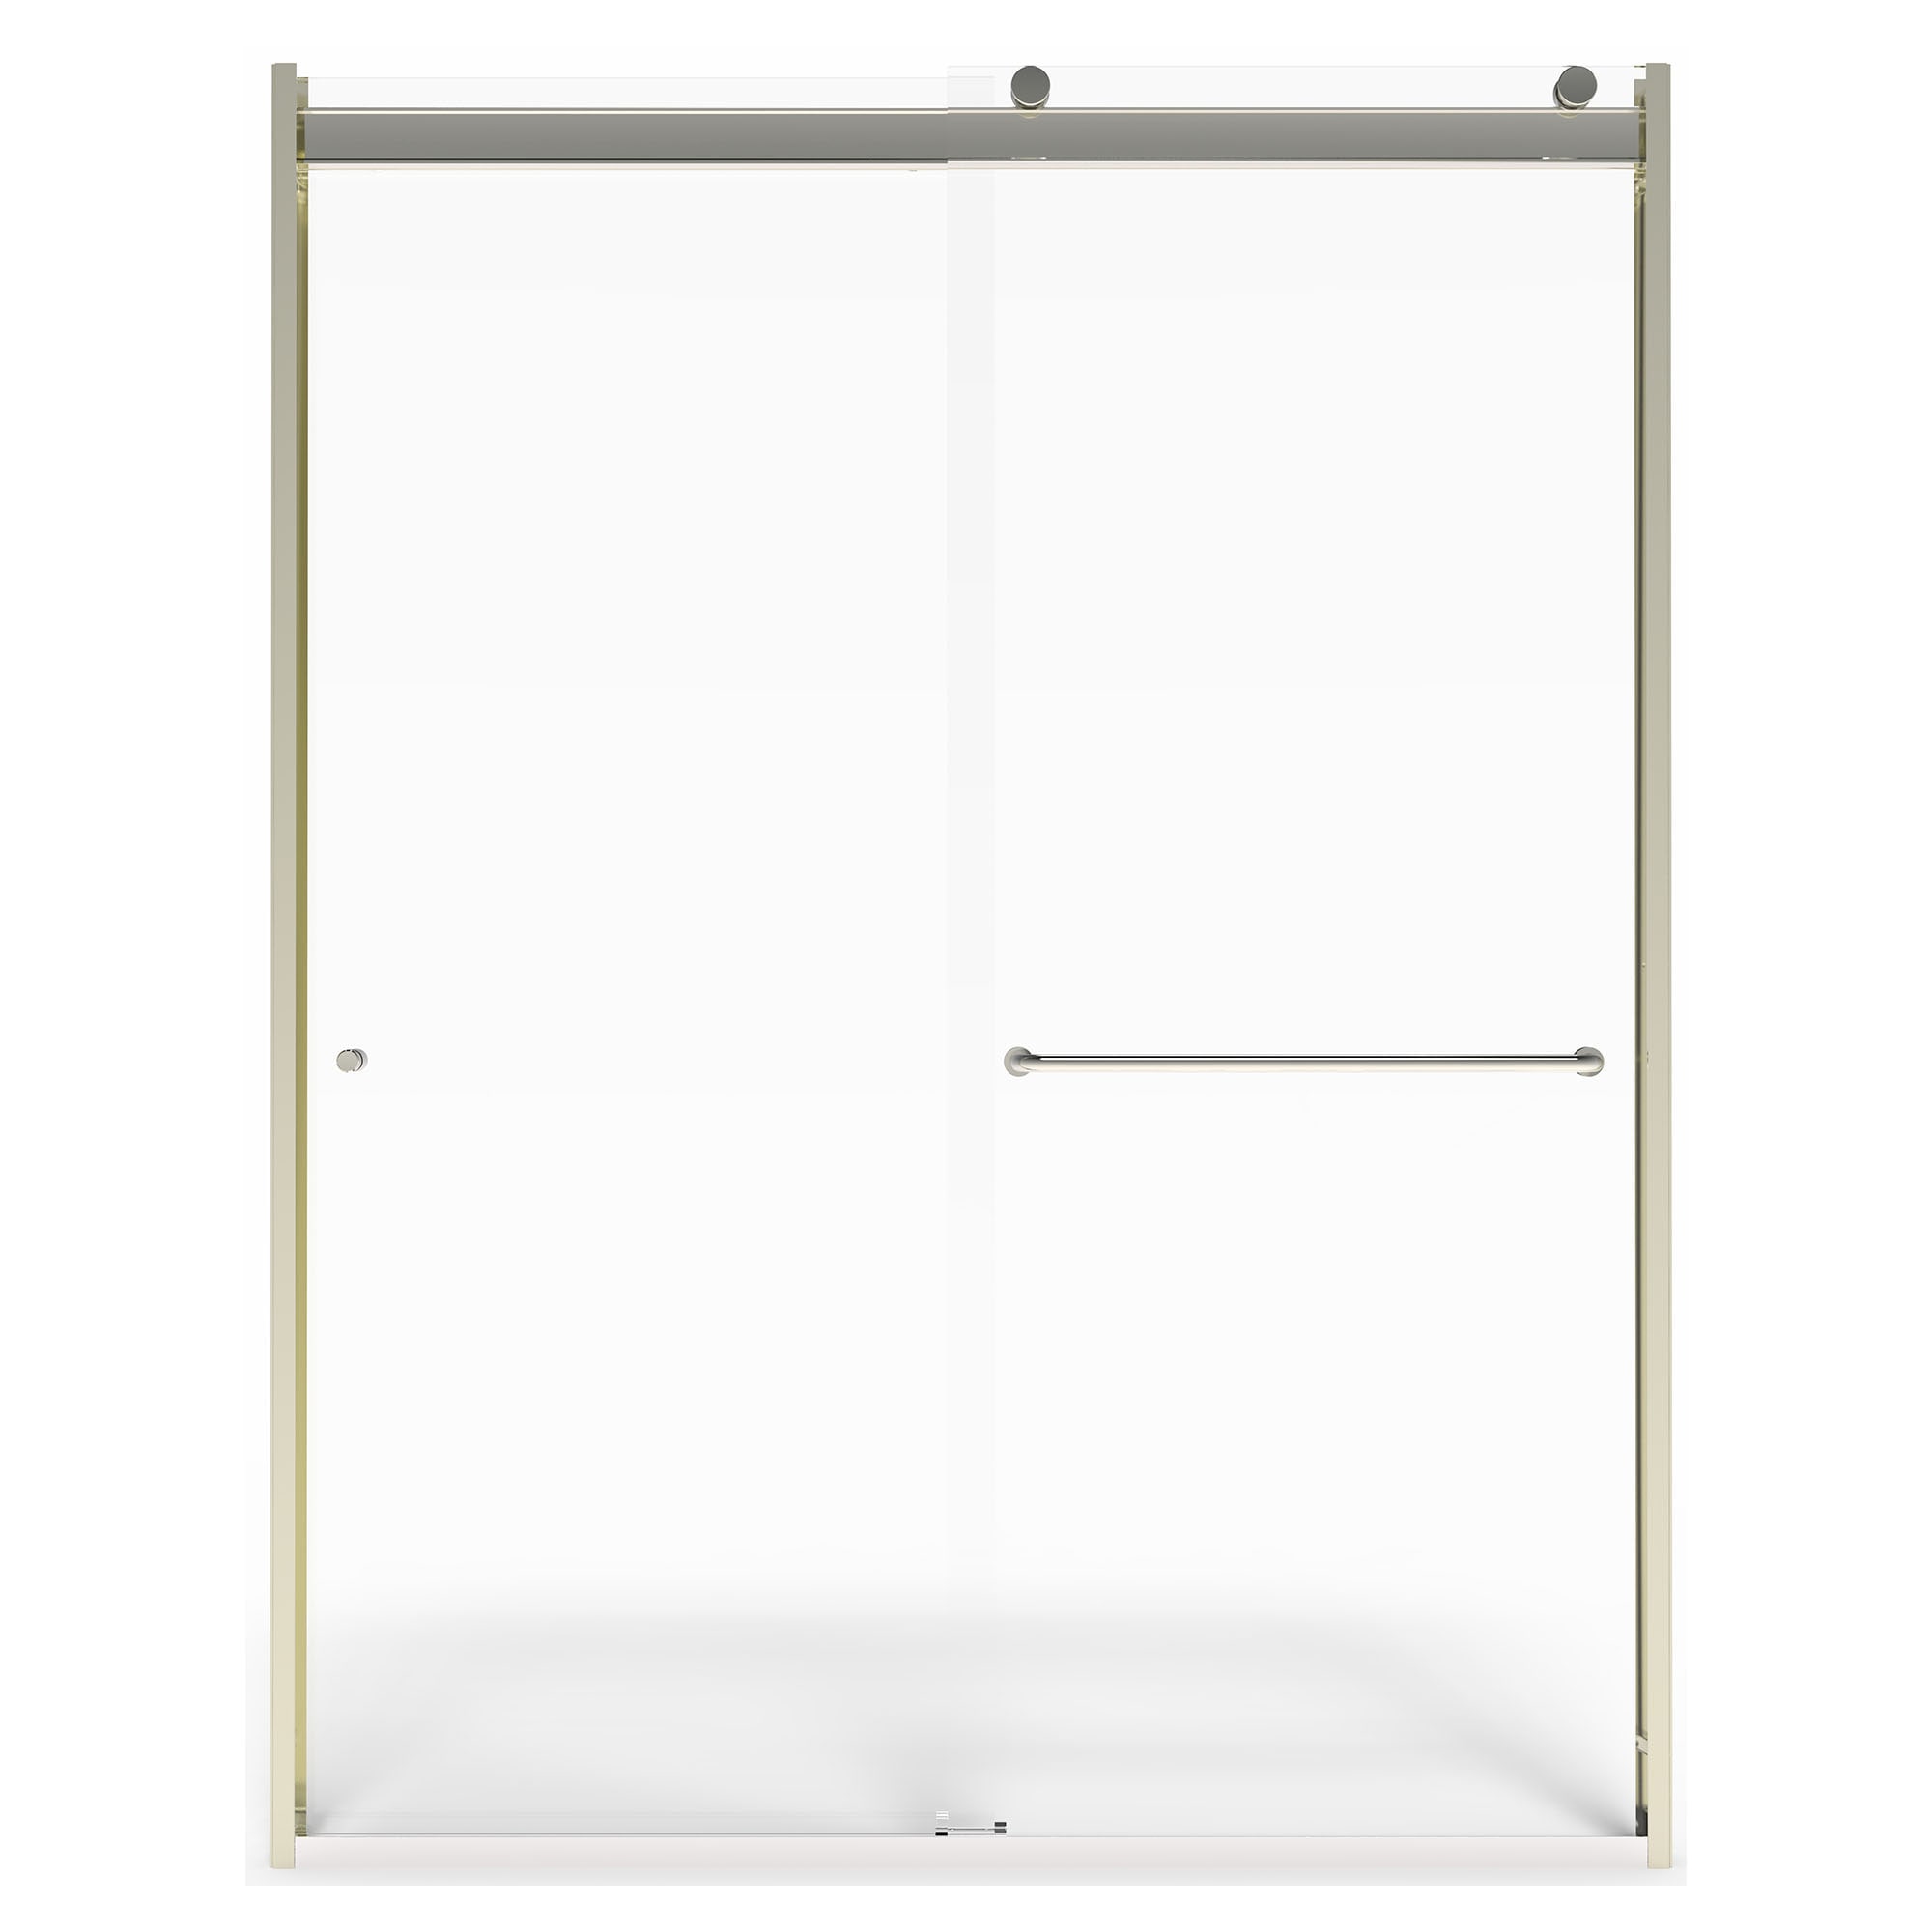 Brushed Nickel 56-in to 60-in x 76-in Semi-frameless Sliding Soft Close Shower Door | - American Standard AM00811400.006